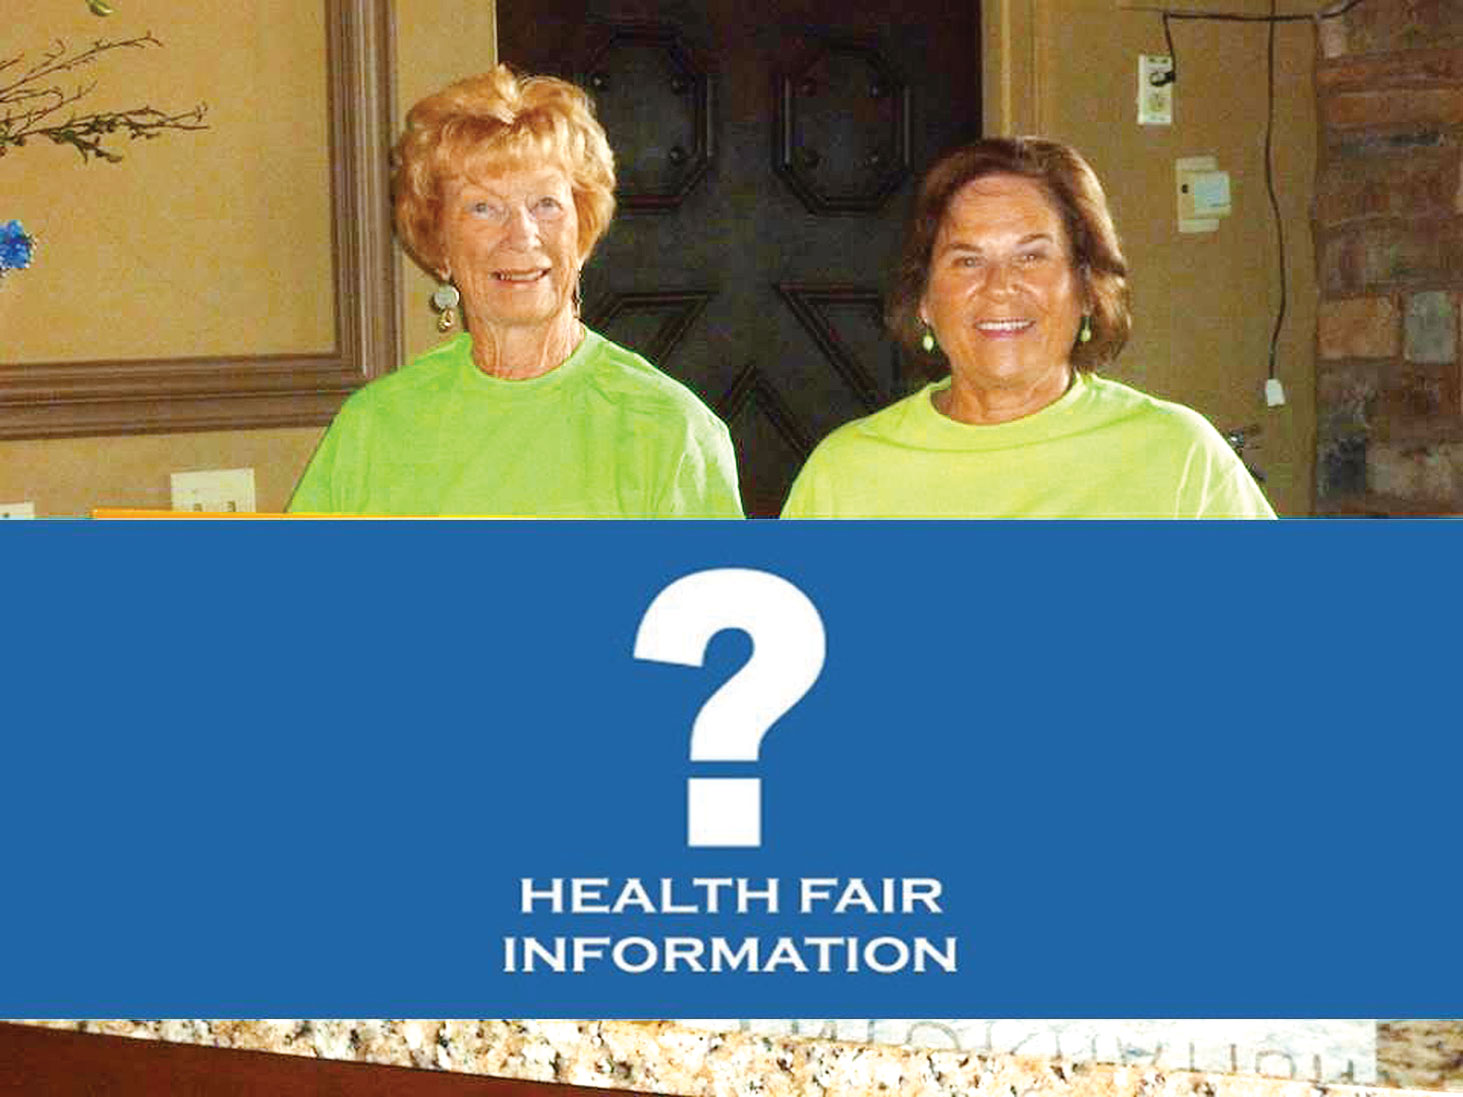 Look for the Information Center at the October Health Fair